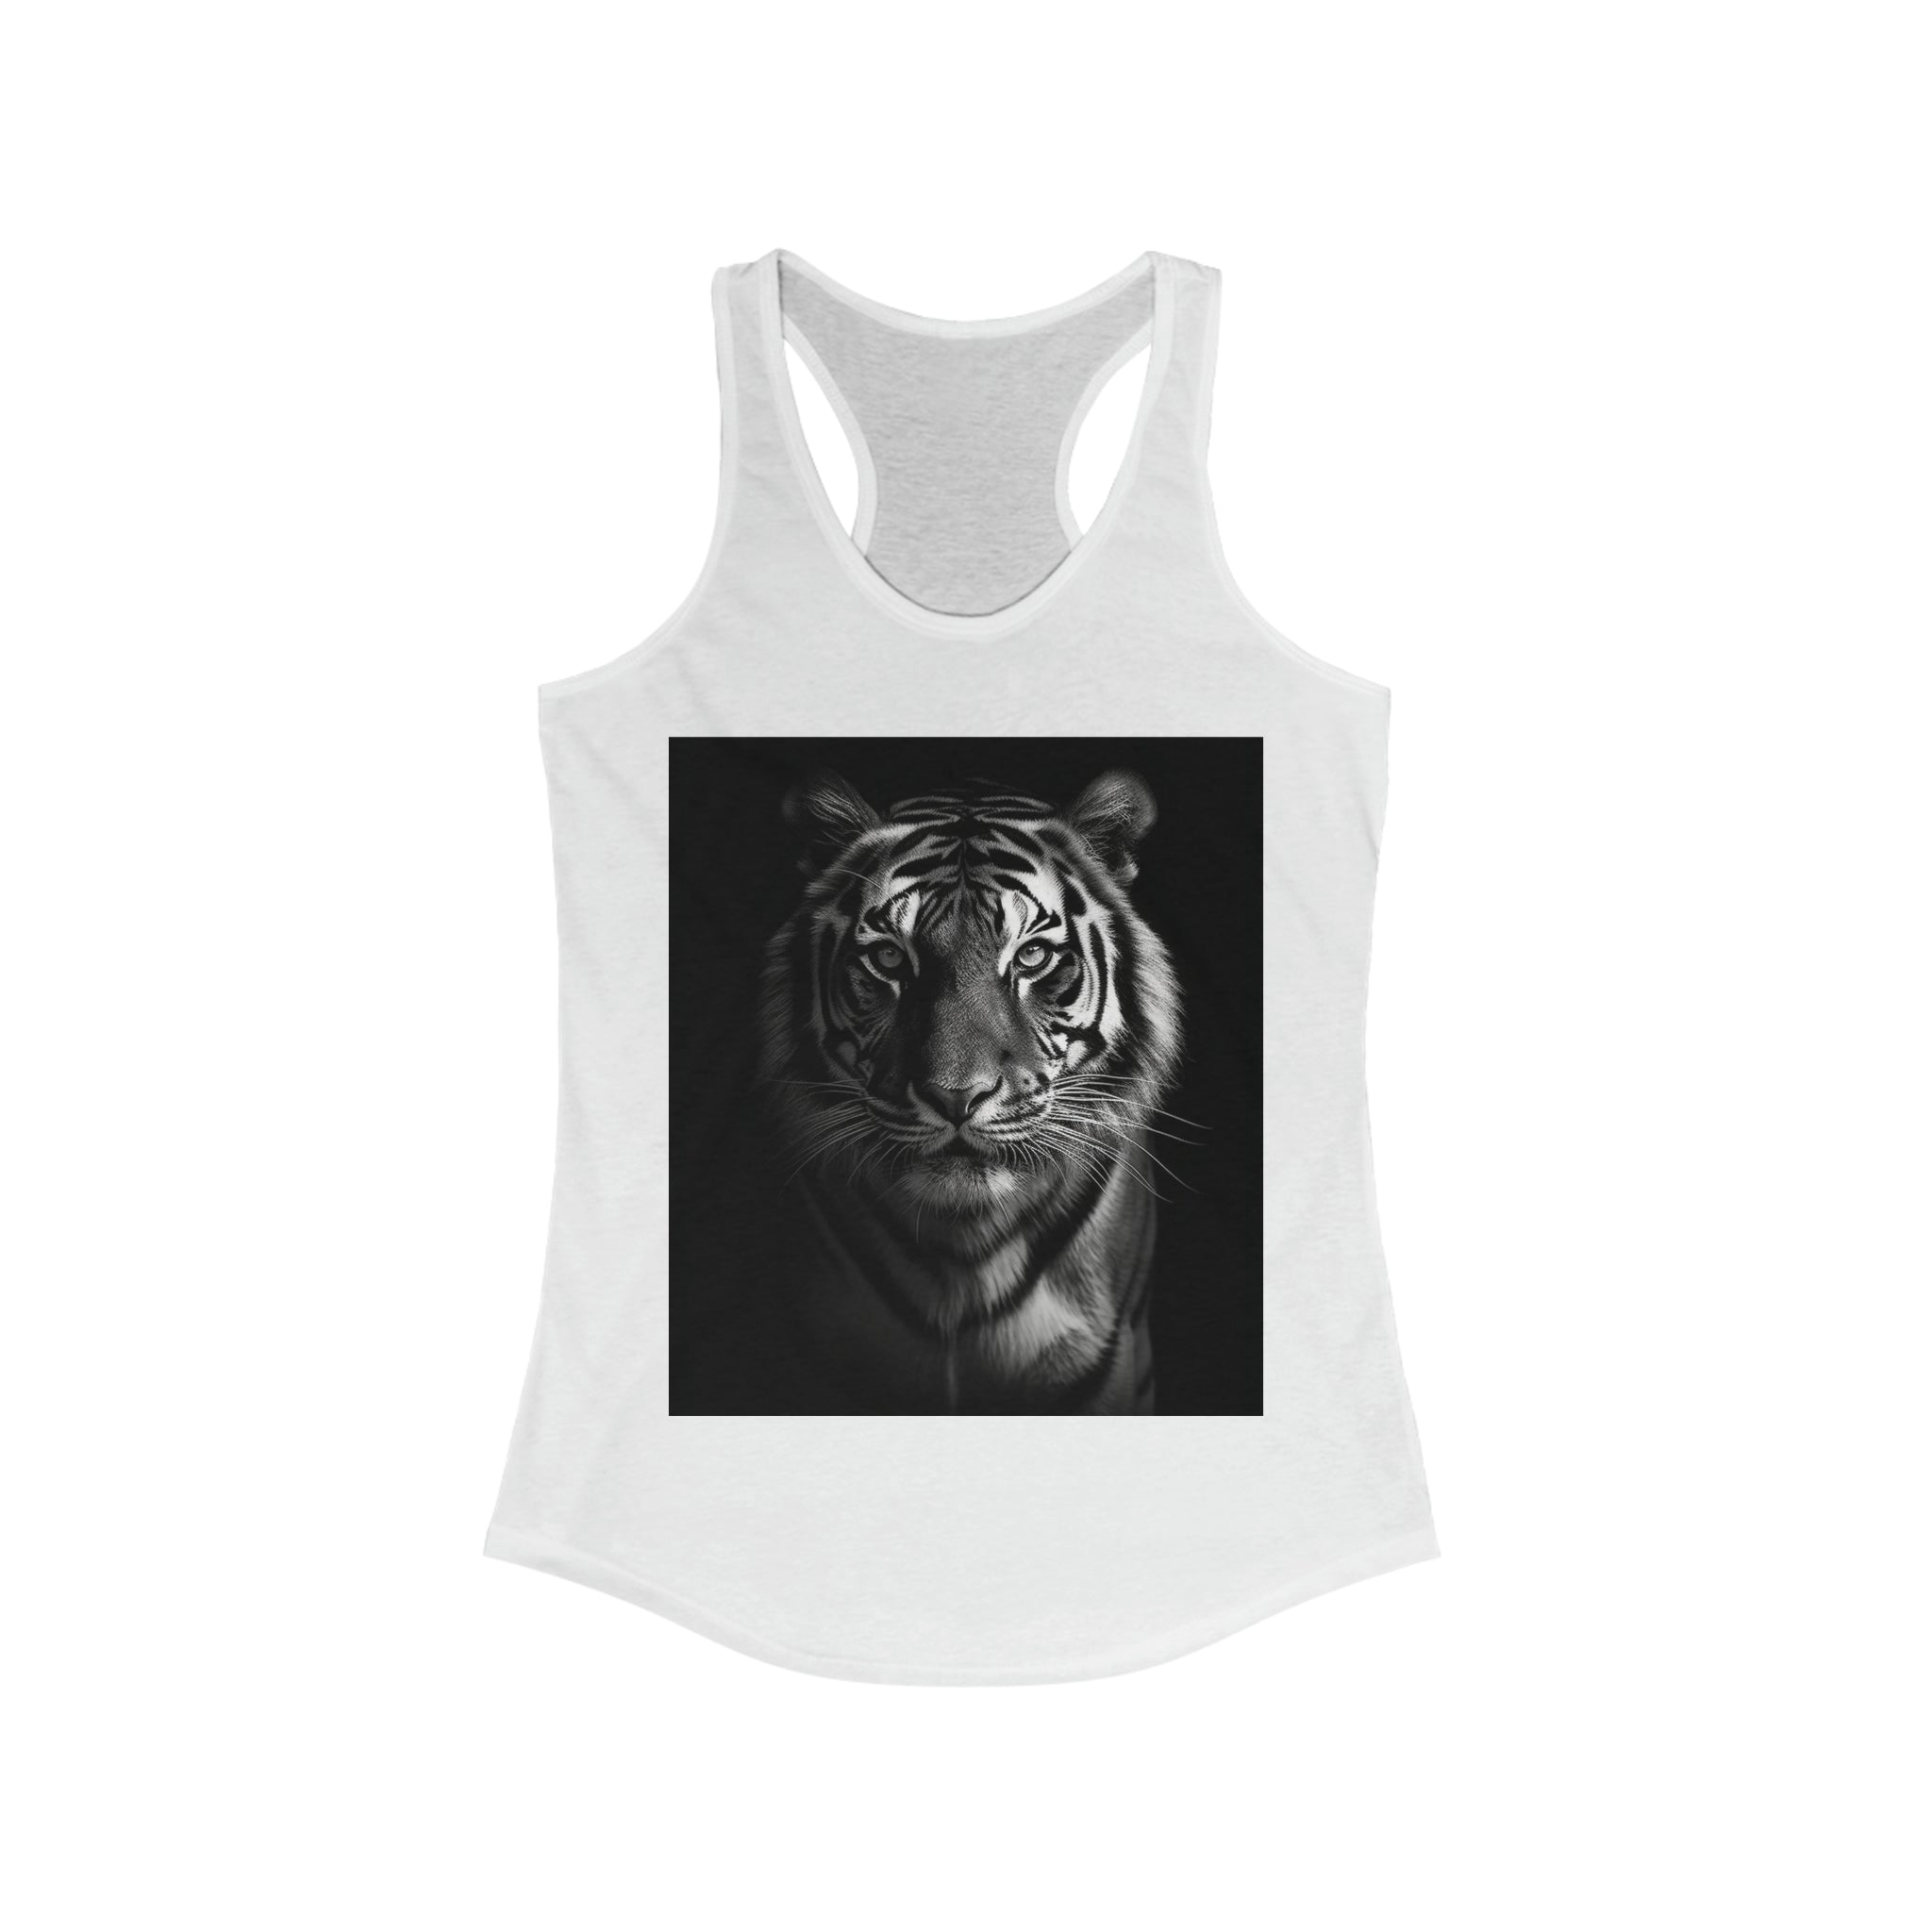 This image displays a sleek and stylish women's racerback tank top, featuring a vibrant and detailed design of a tiger's fierce gaze on the front. The tank top is crafted from high-quality, breathable fabric, showcasing its slim fit and the racerback cut that allows for optimal movement and comfort.